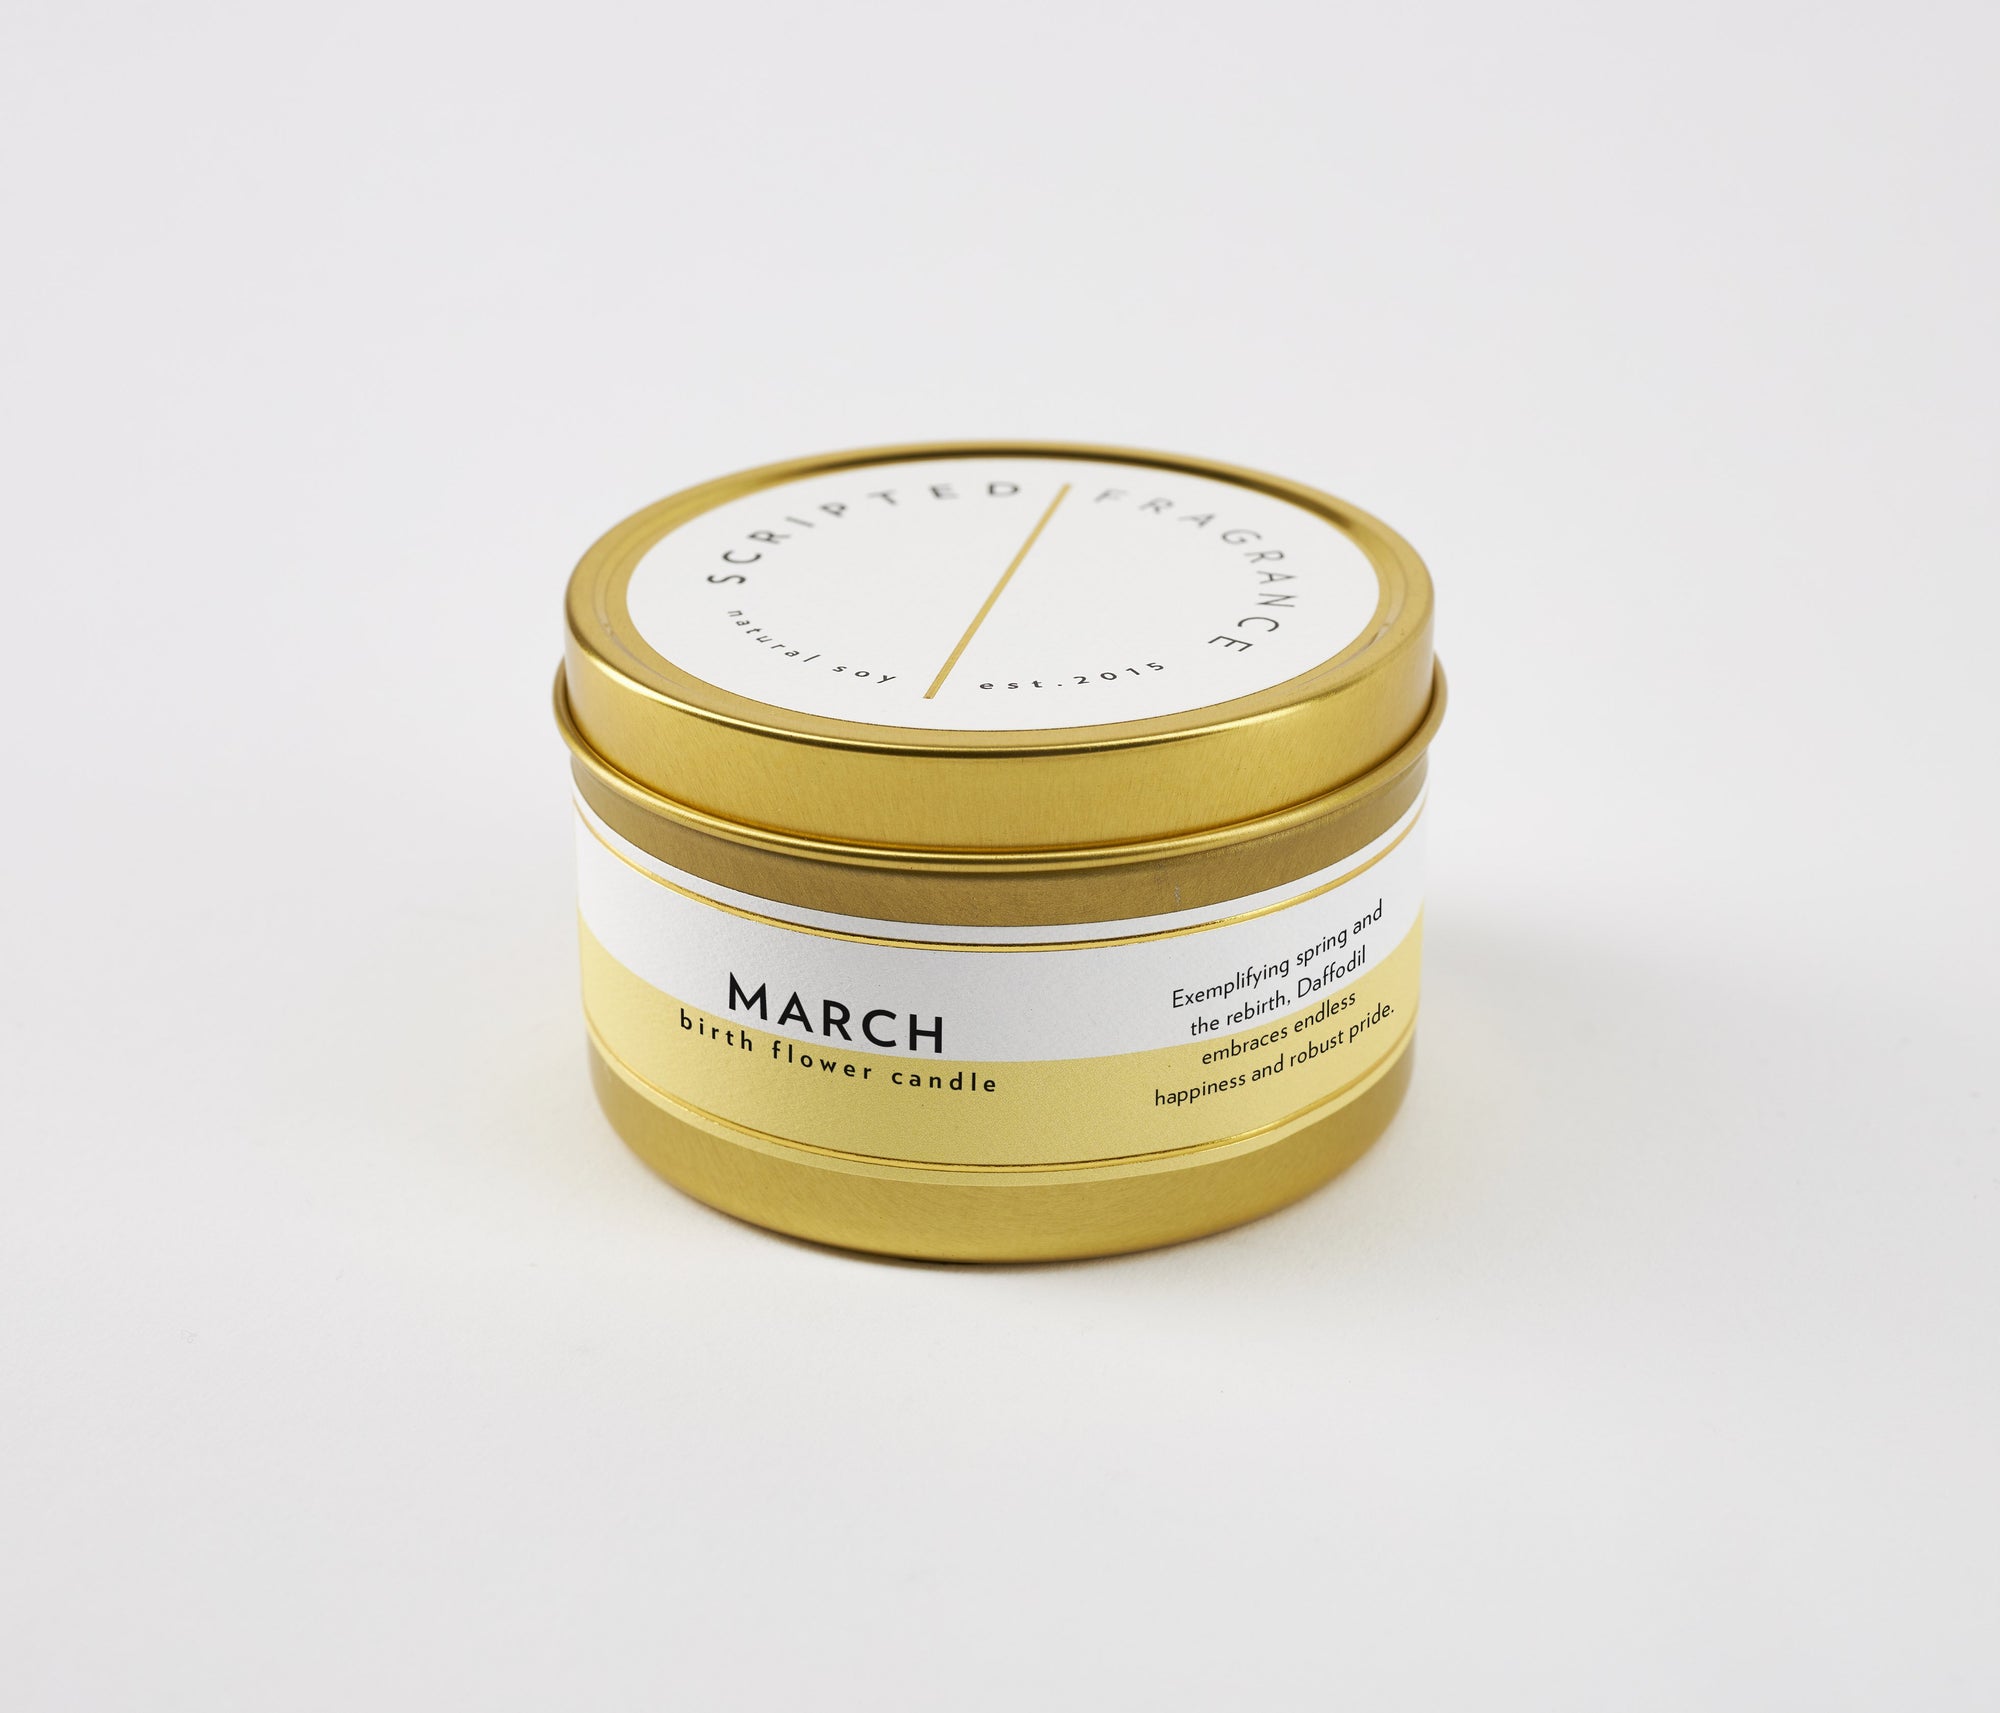 March Birth Month Flower Soy Candle, Daffodil Candle